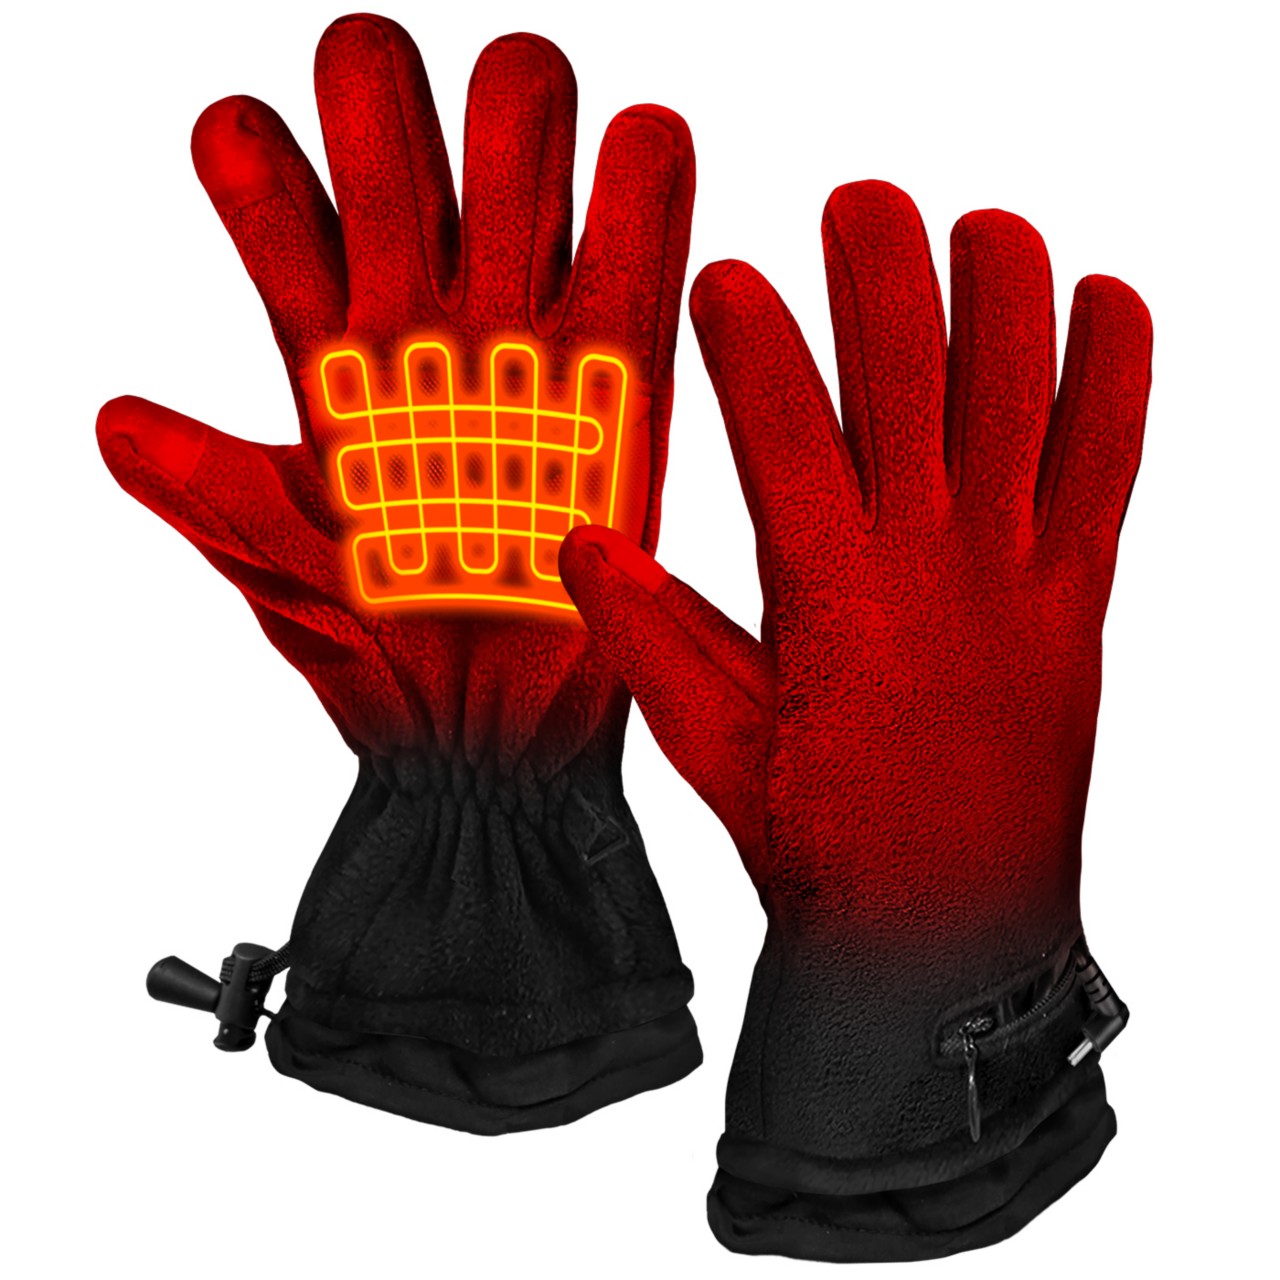 Image of winter gloves links to all winter gloves catalog.